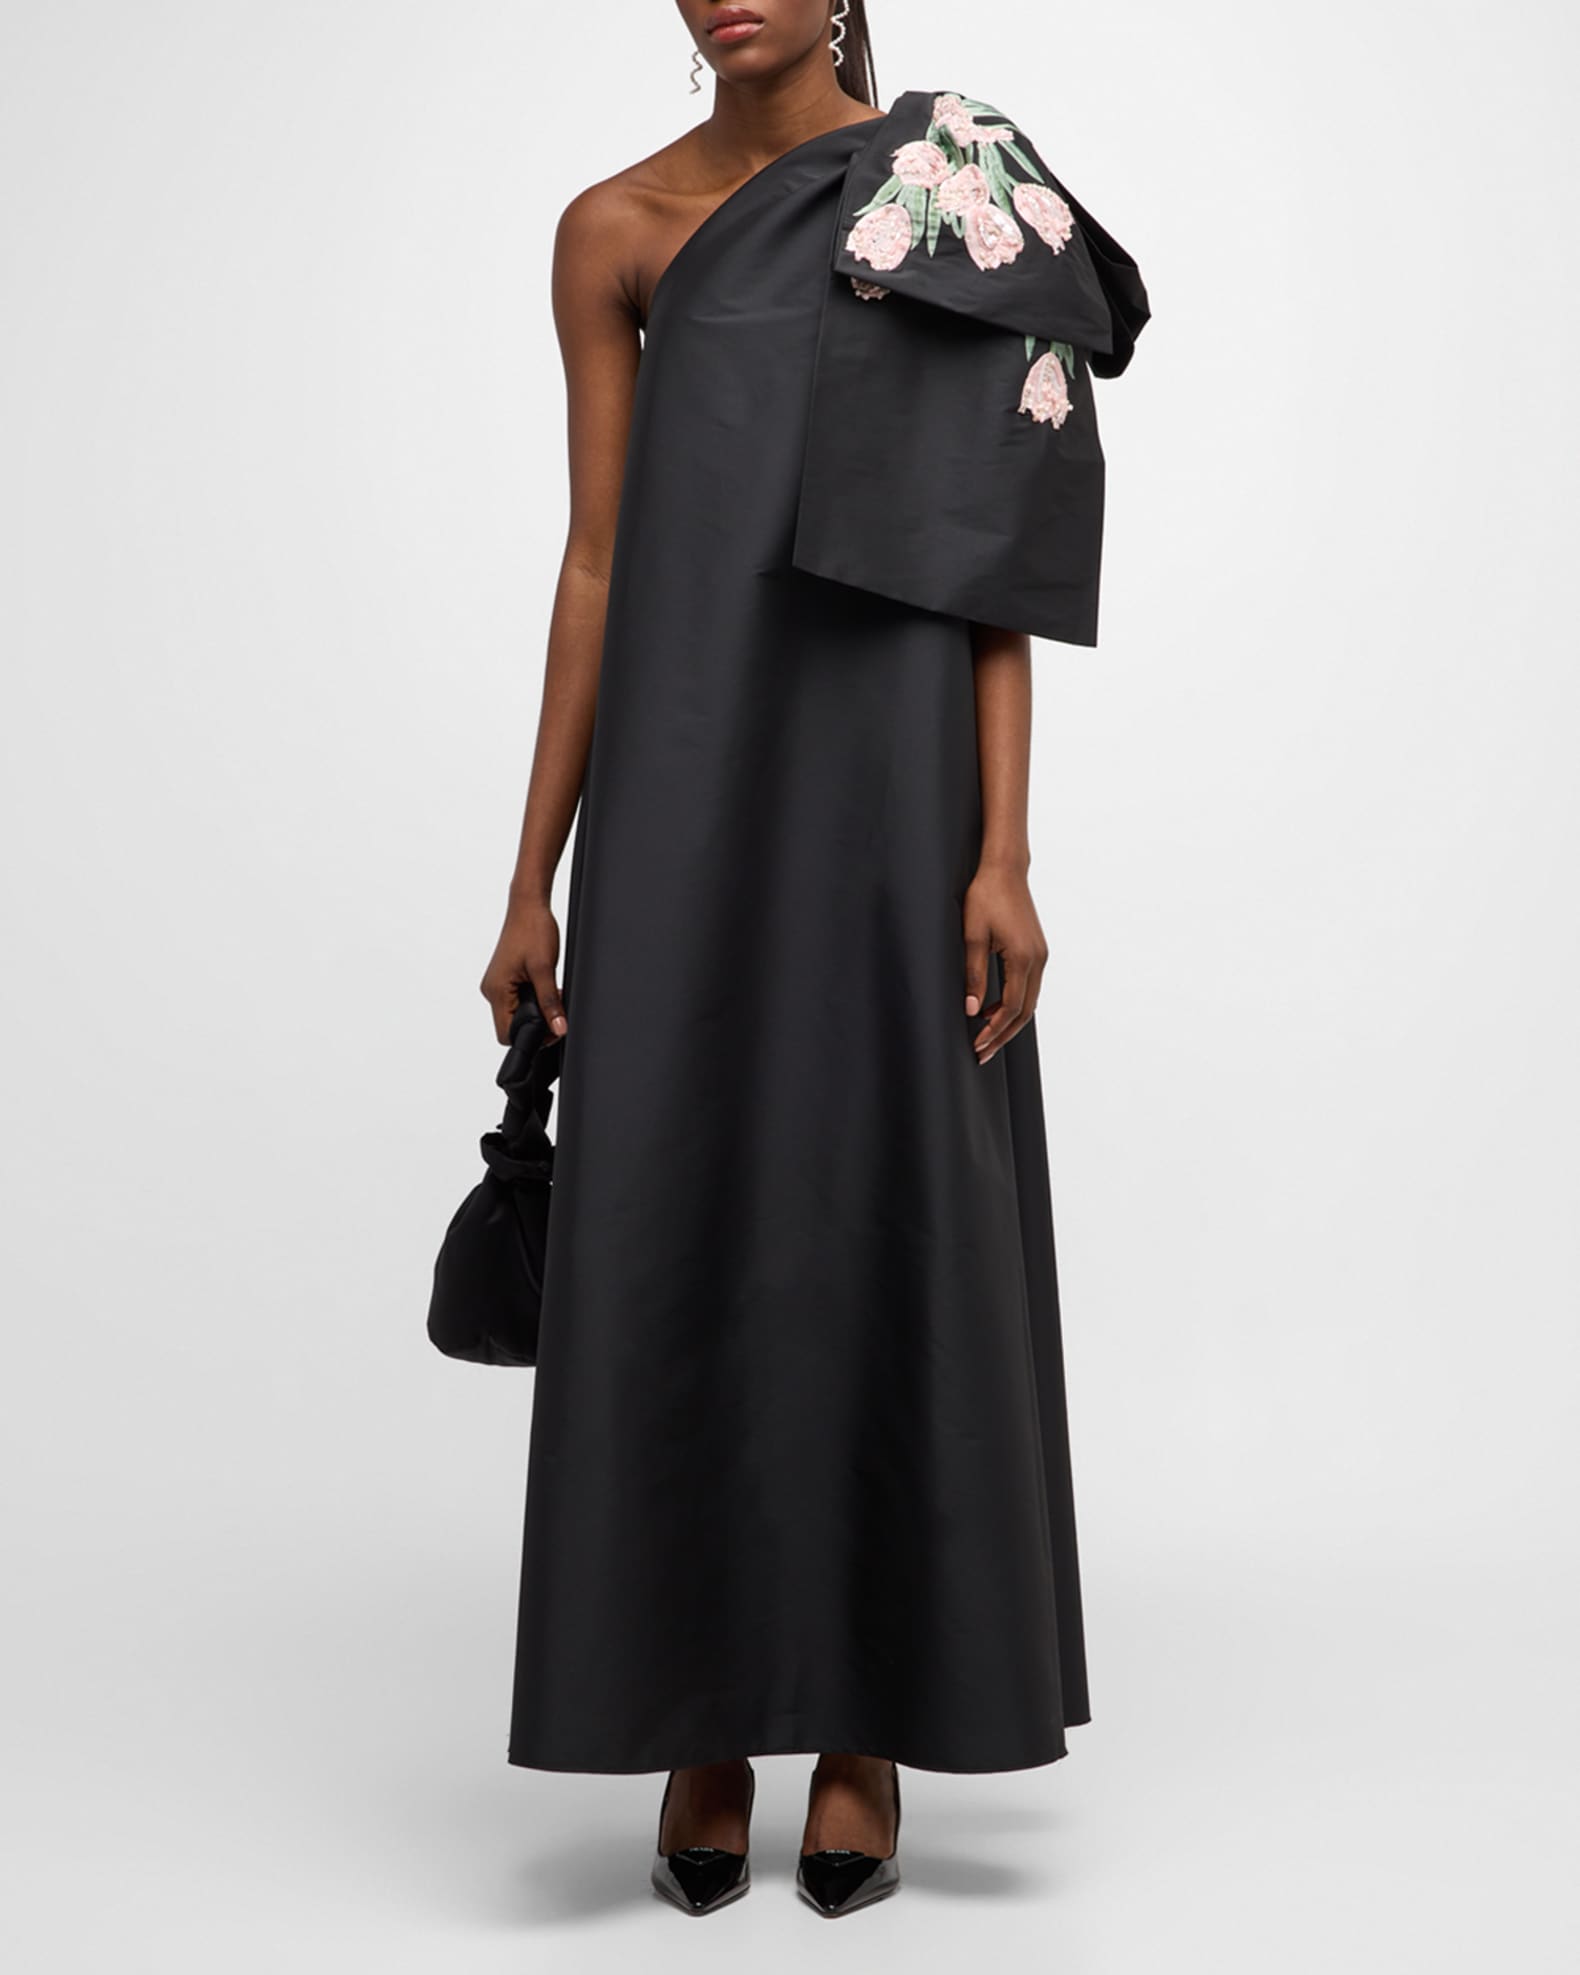 Winnie One-Shoulder Floral-Embroidered Dress with Bow Shoulder | Neiman Marcus